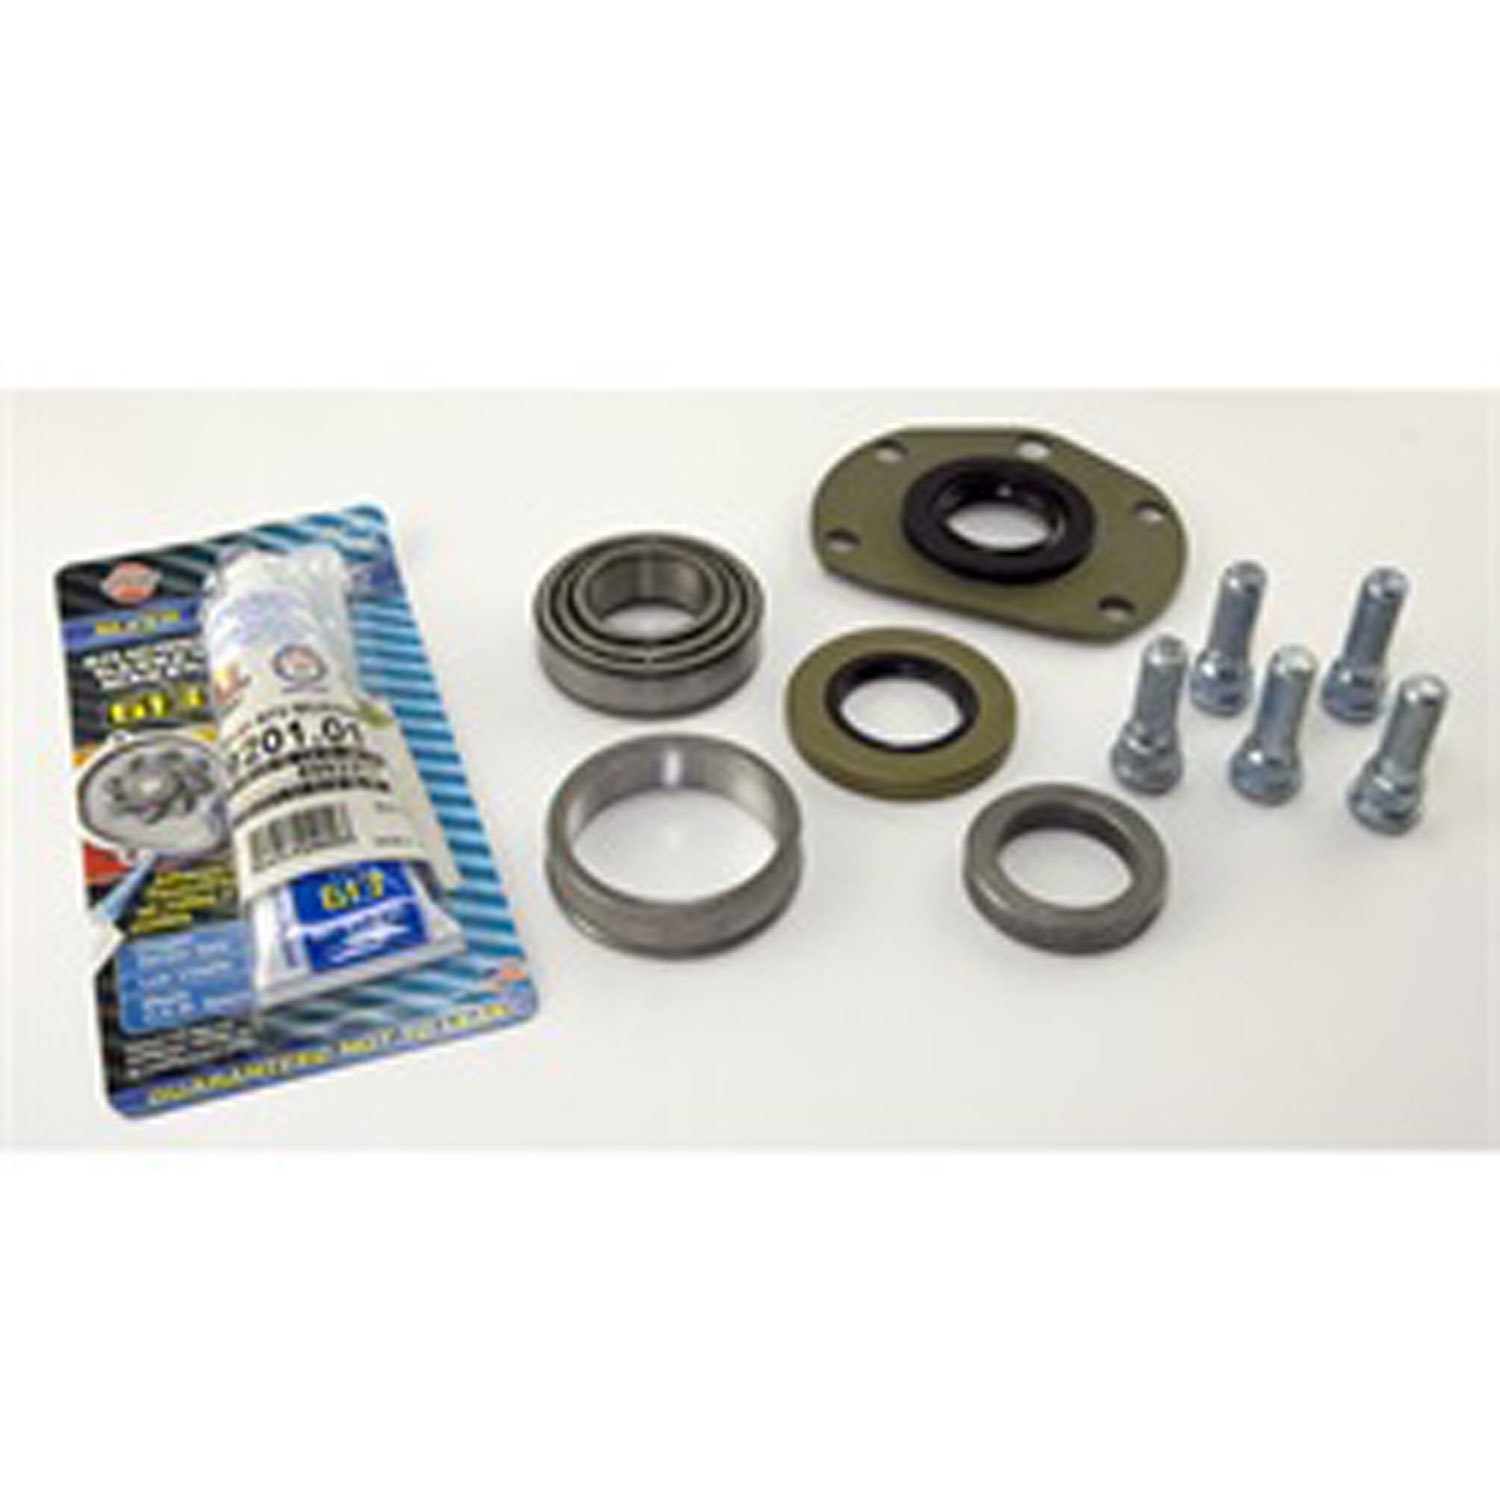 One Piece Axle Conversion Bearing and Hardware Kit AMC 20 Does One Side LH or RH 1976-1983 CJ5 1976-1986 CJ7 1981-1986 CJ8